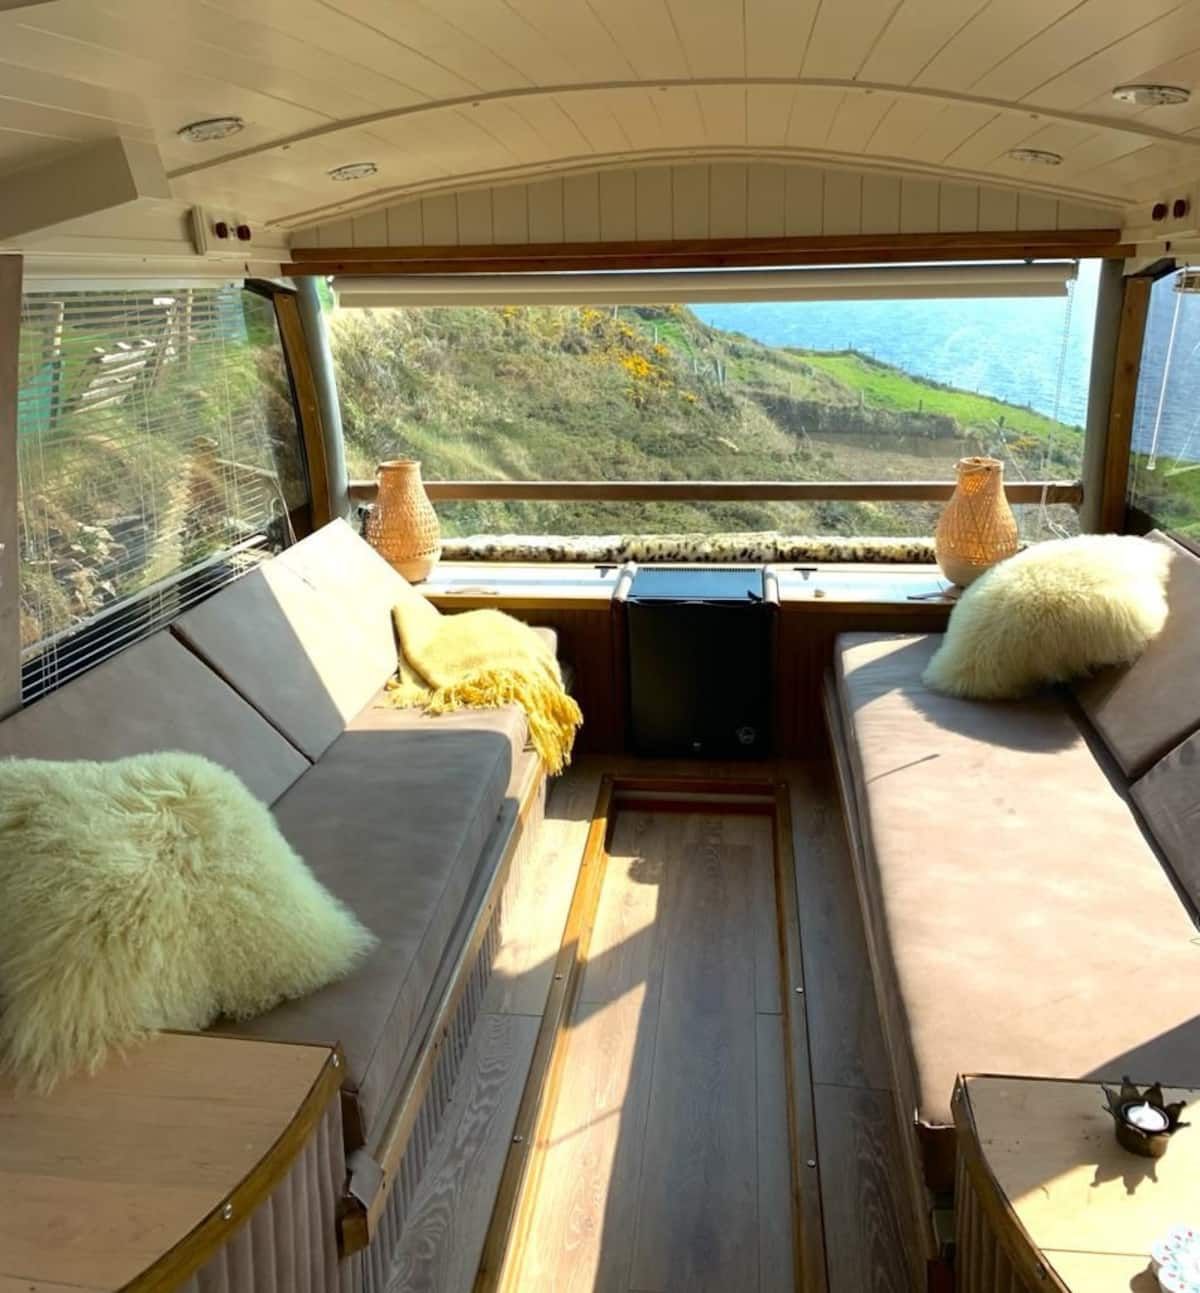 On the hunt for a unique staycation? Check out this Double Decker Bus in West Cork.